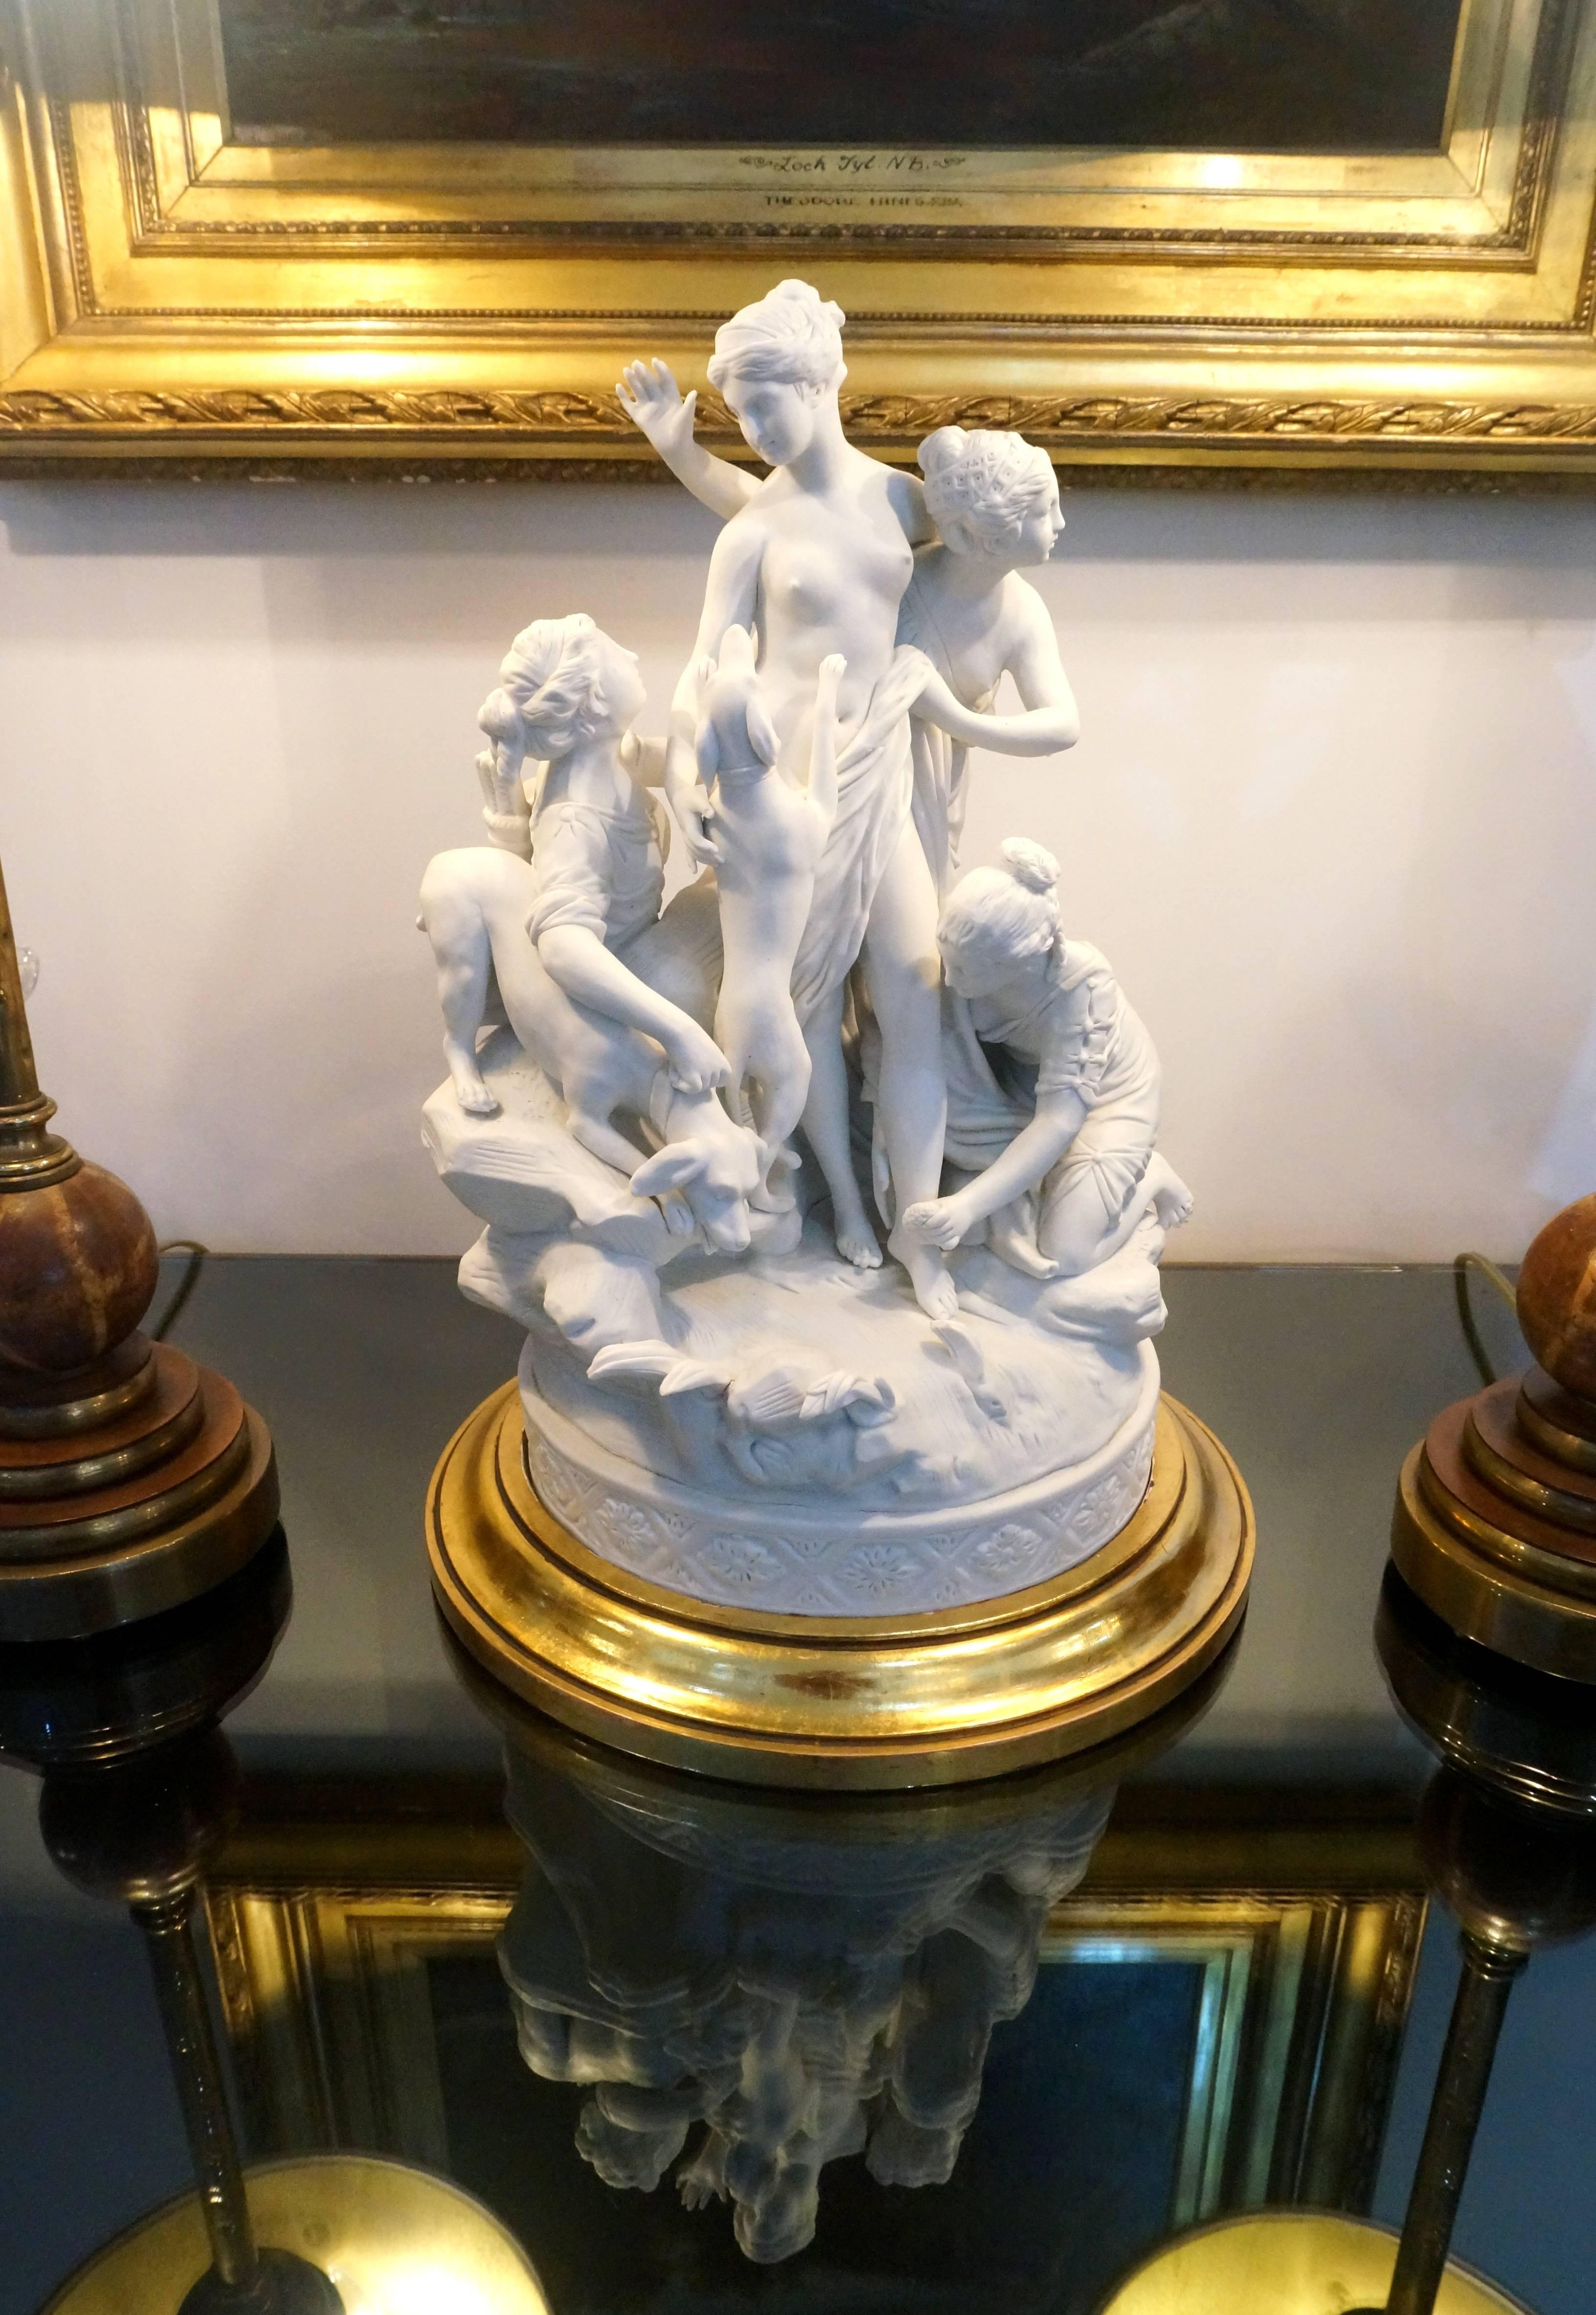 This figural sculpture depicting Diana at the bath is a sevres, biscuit porcelain and dates from the late 20th century. The piece is mounted on a 18-karat parcel-gilt finished base.

FYI.
Louis-Simon Boizot (1743–1809) was a French sculptor whose